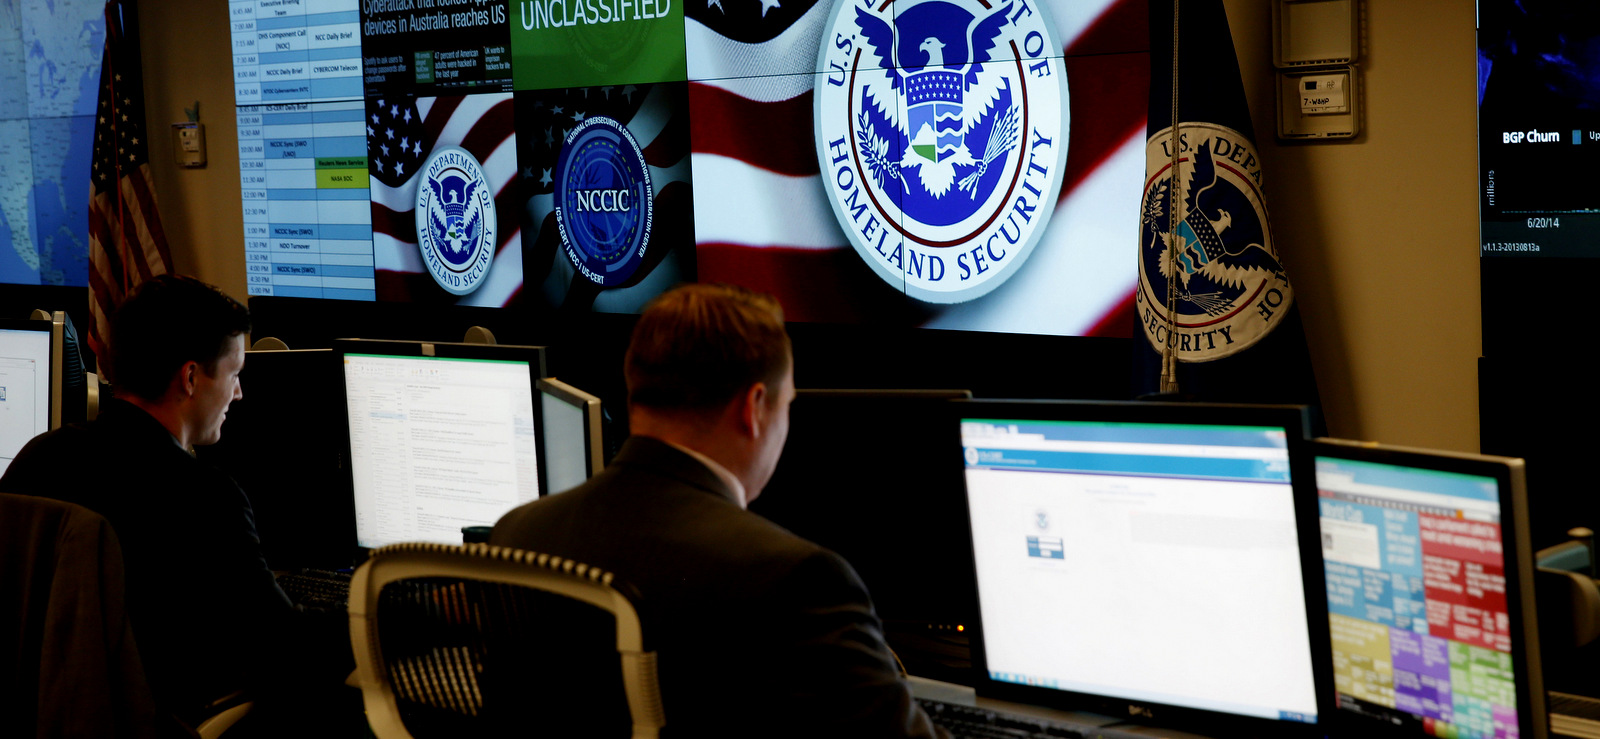 Employees work iinsid of the National Cybersecurity and Communications Integration Center during a media tour in Arlington, Virginia June 26, 2014. (Reuters/Kevin Lamarque)